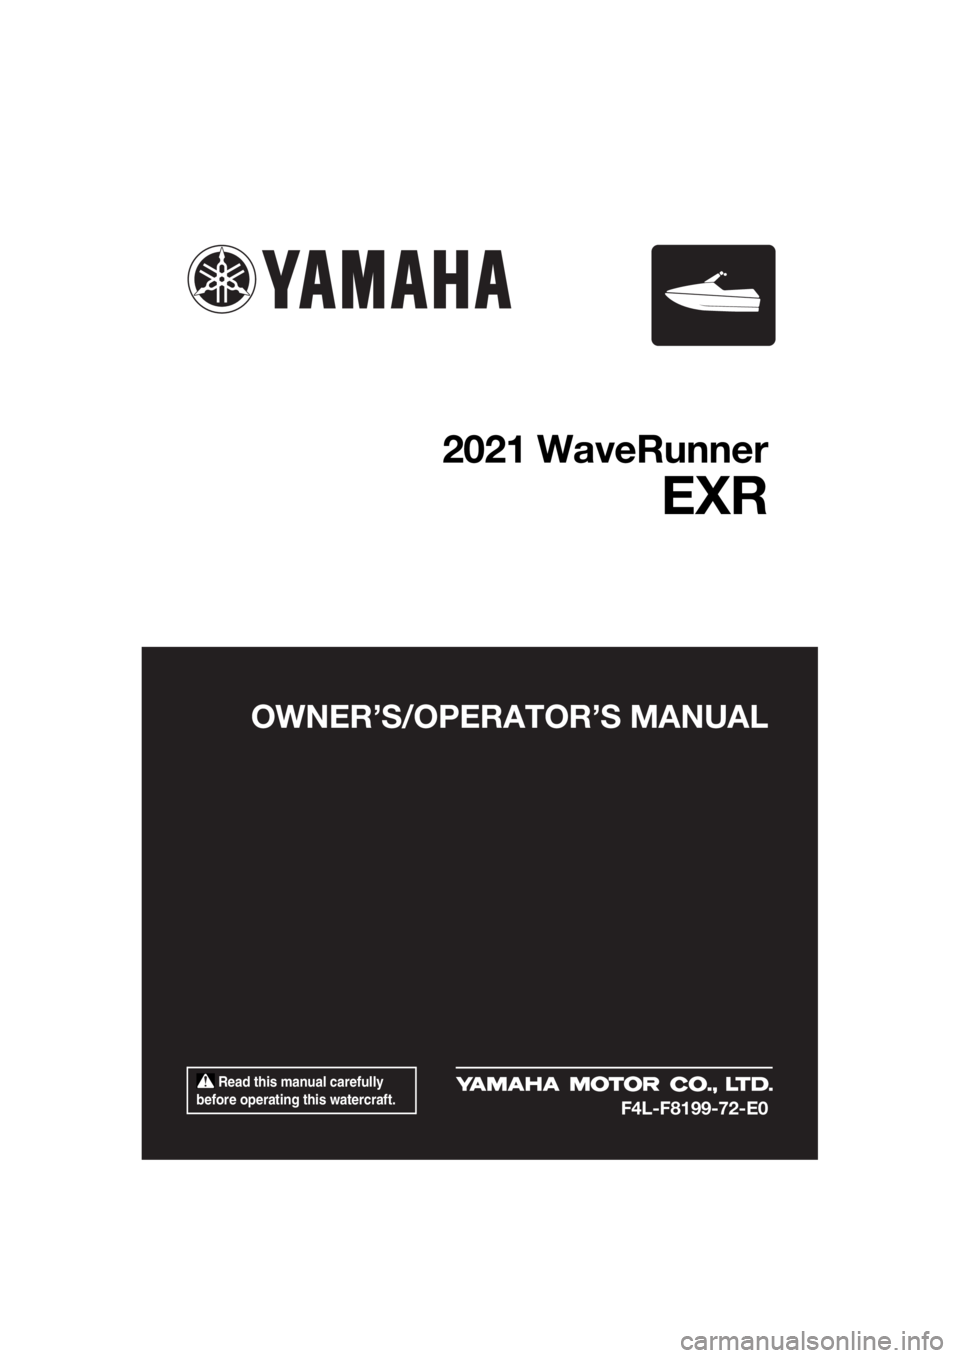 YAMAHA FJR1300 2021  Owners Manual  Read this manual carefully 
before operating this watercraft.
OWNER’S/OPERAT OR’S MANUAL
2021 WaveRunner
EXR
F4L-F8199-72-E0
UF4L72E0.book  Page 1  Thursday, June 18, 2020  1:29 PM 